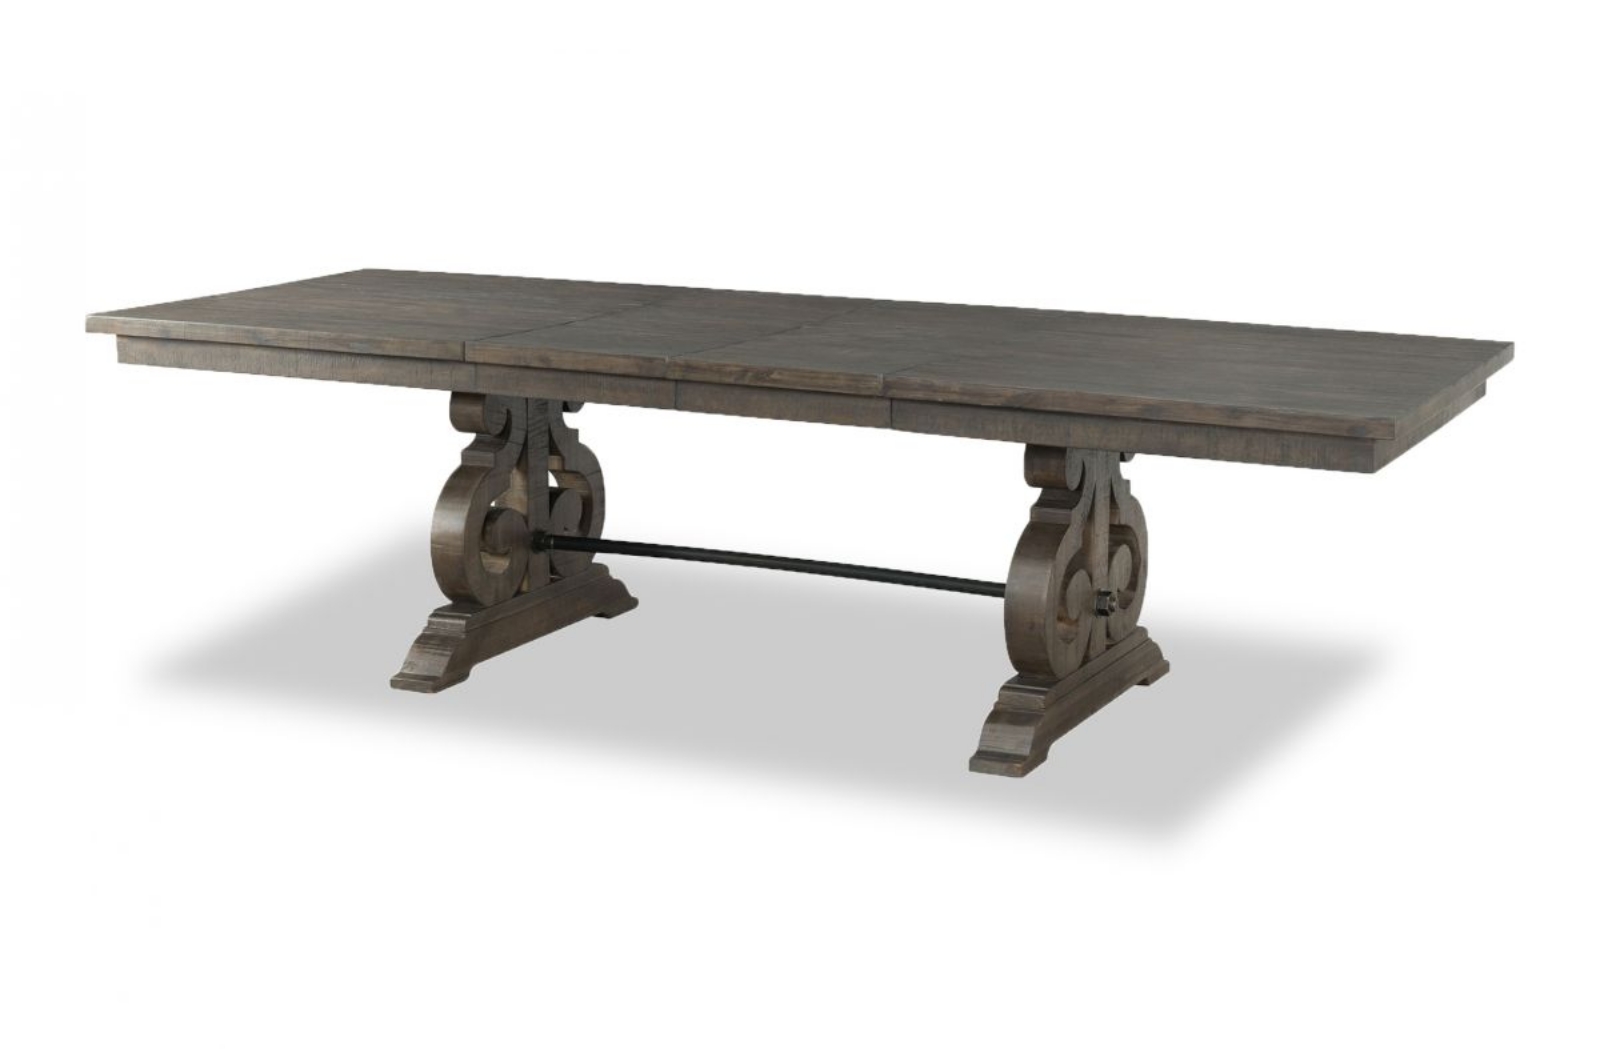 Picture of Elements Stone Dining Table